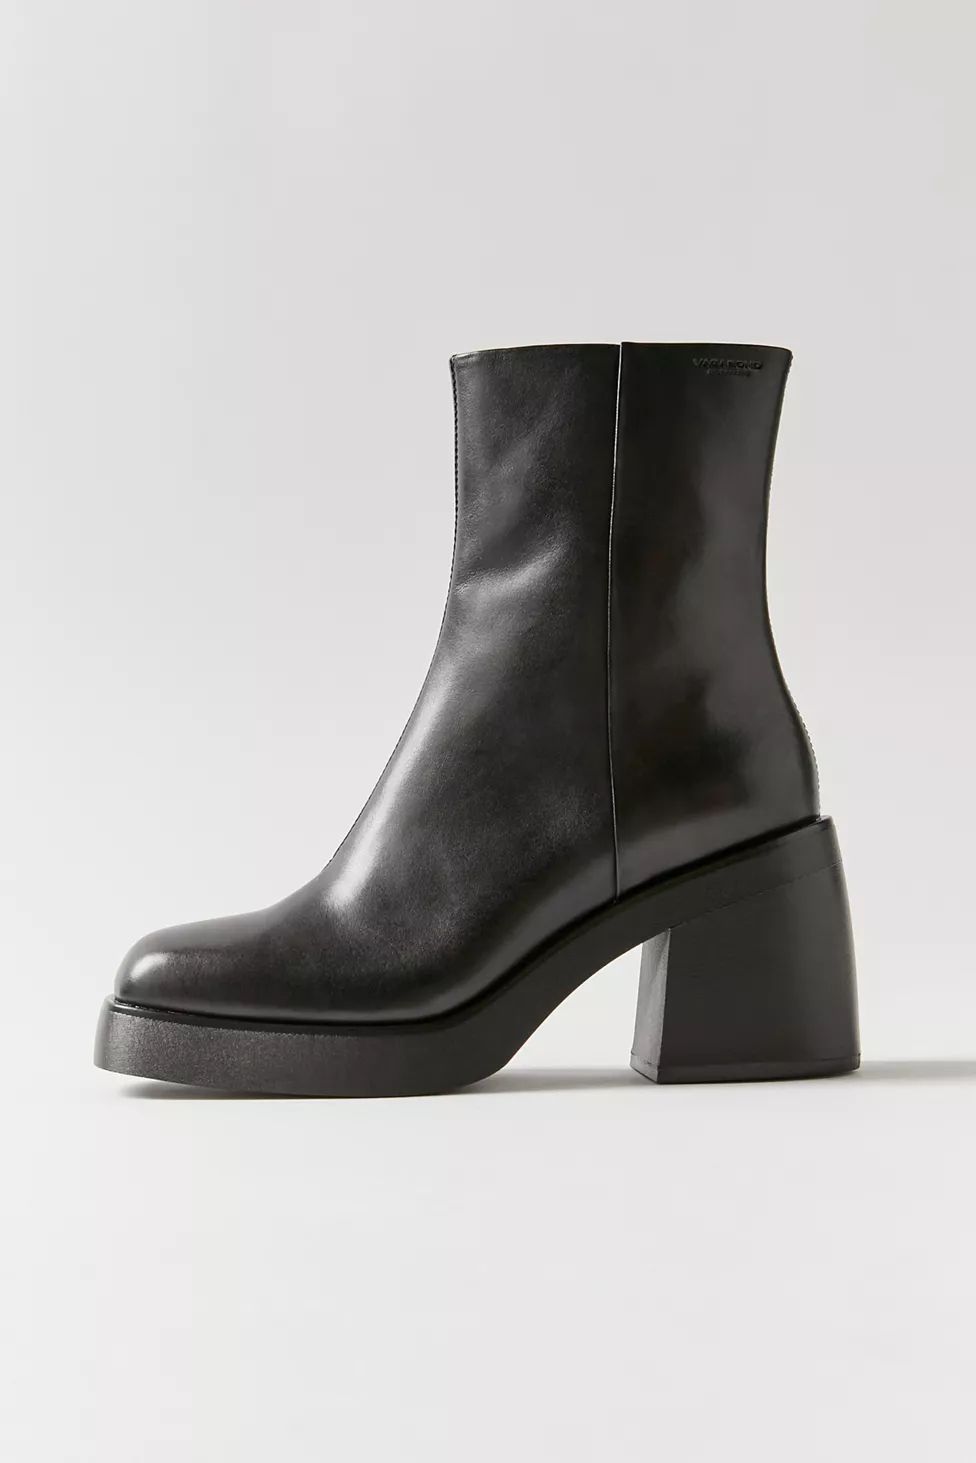 Vagabond Shoemakers Brooke Platform Boot | Urban Outfitters (US and RoW)